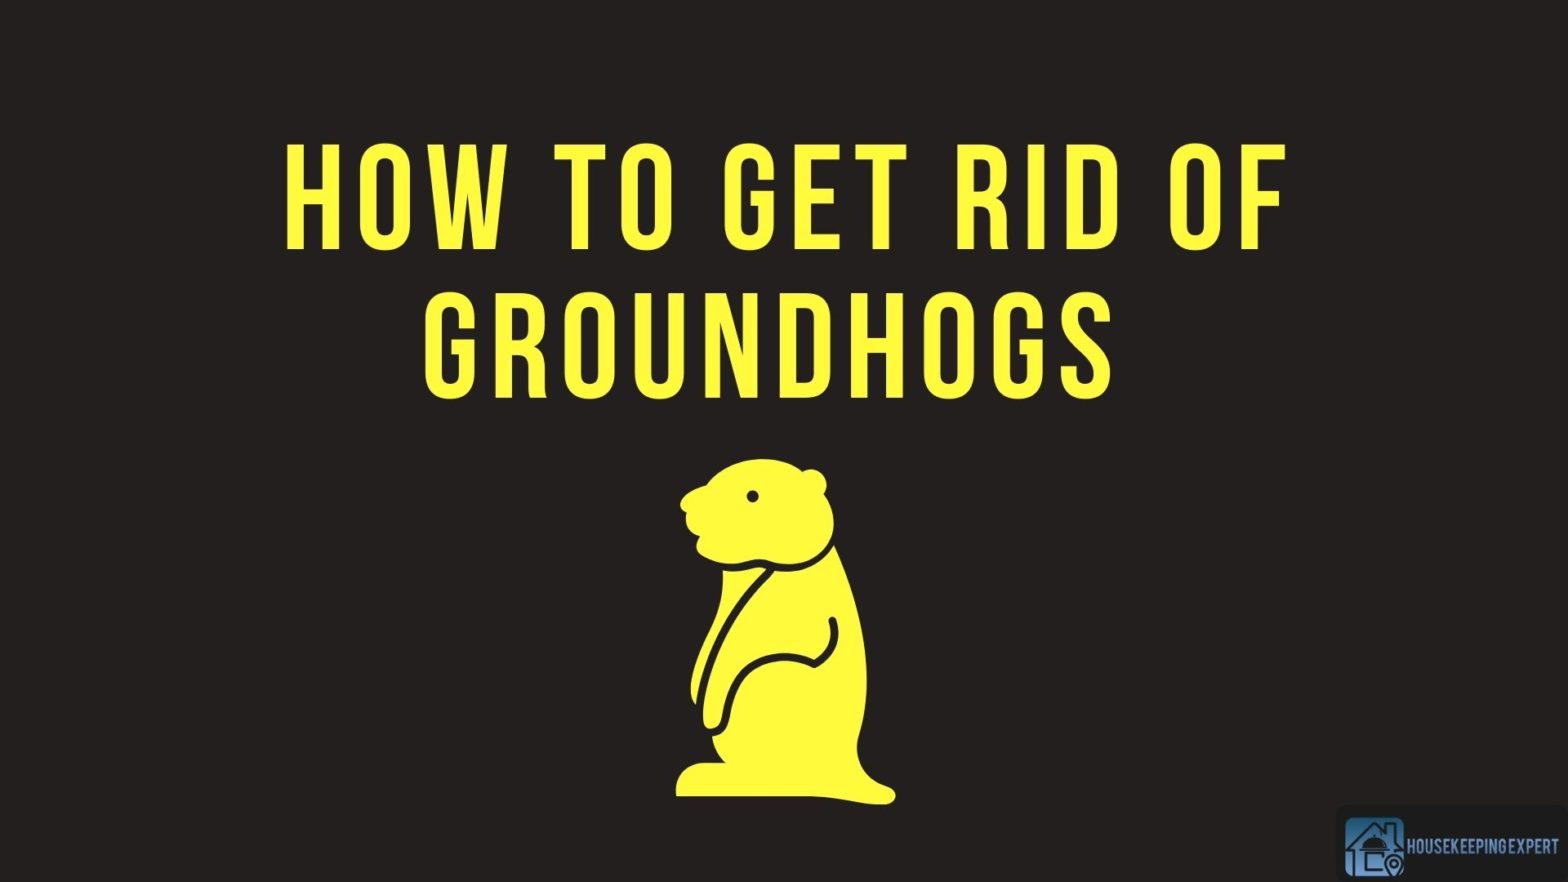 How To Get Rid Of Groundhogs